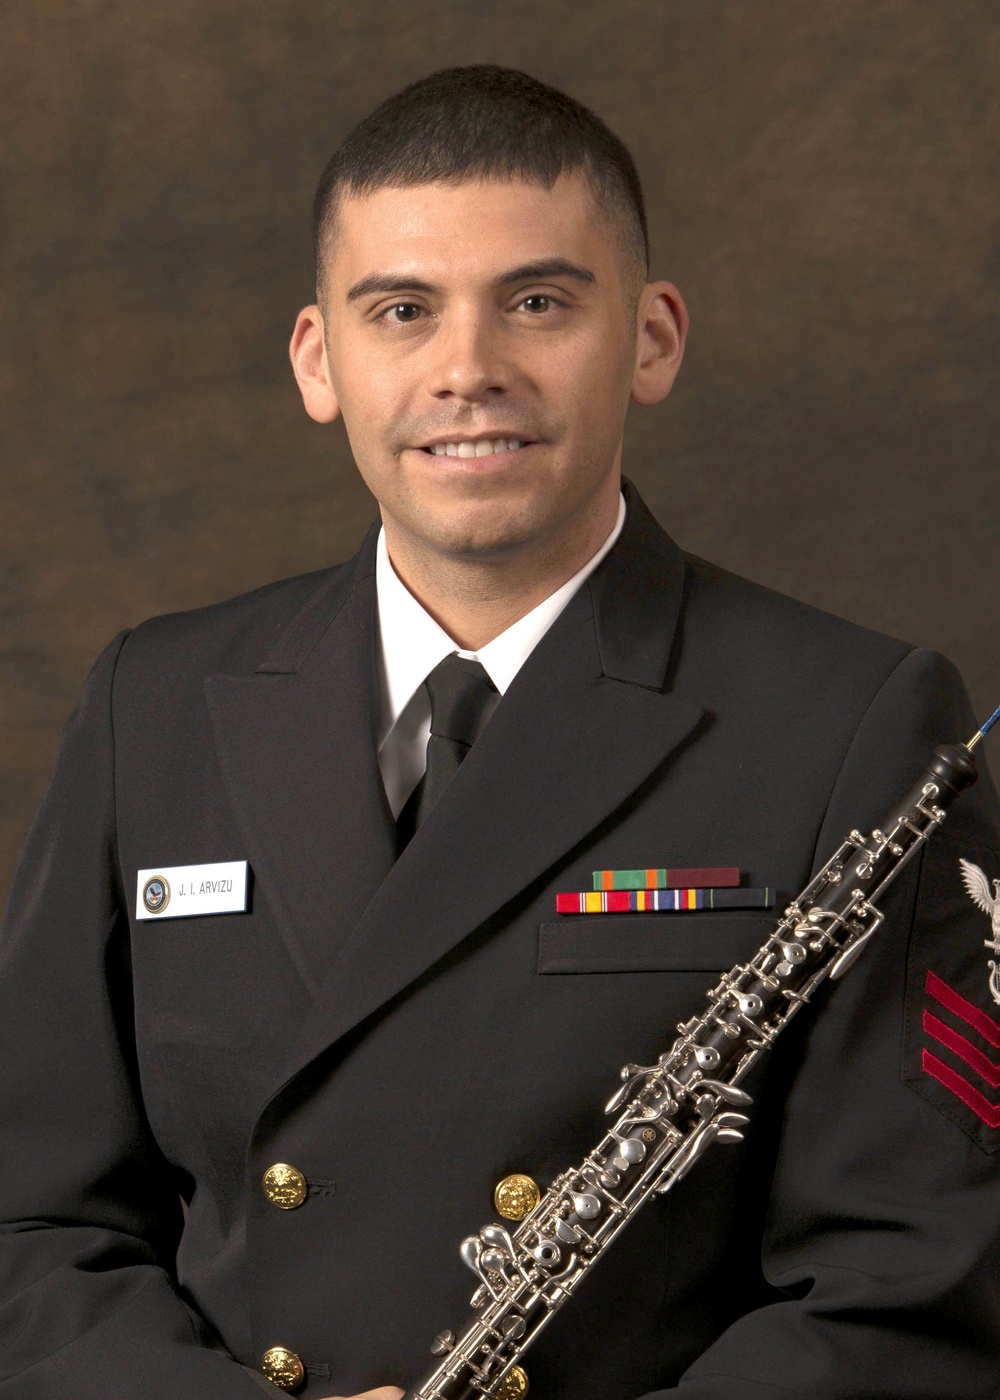 U.S. Petty Officer 1st Class Arvizu supports the 58th Presidential Inauguration